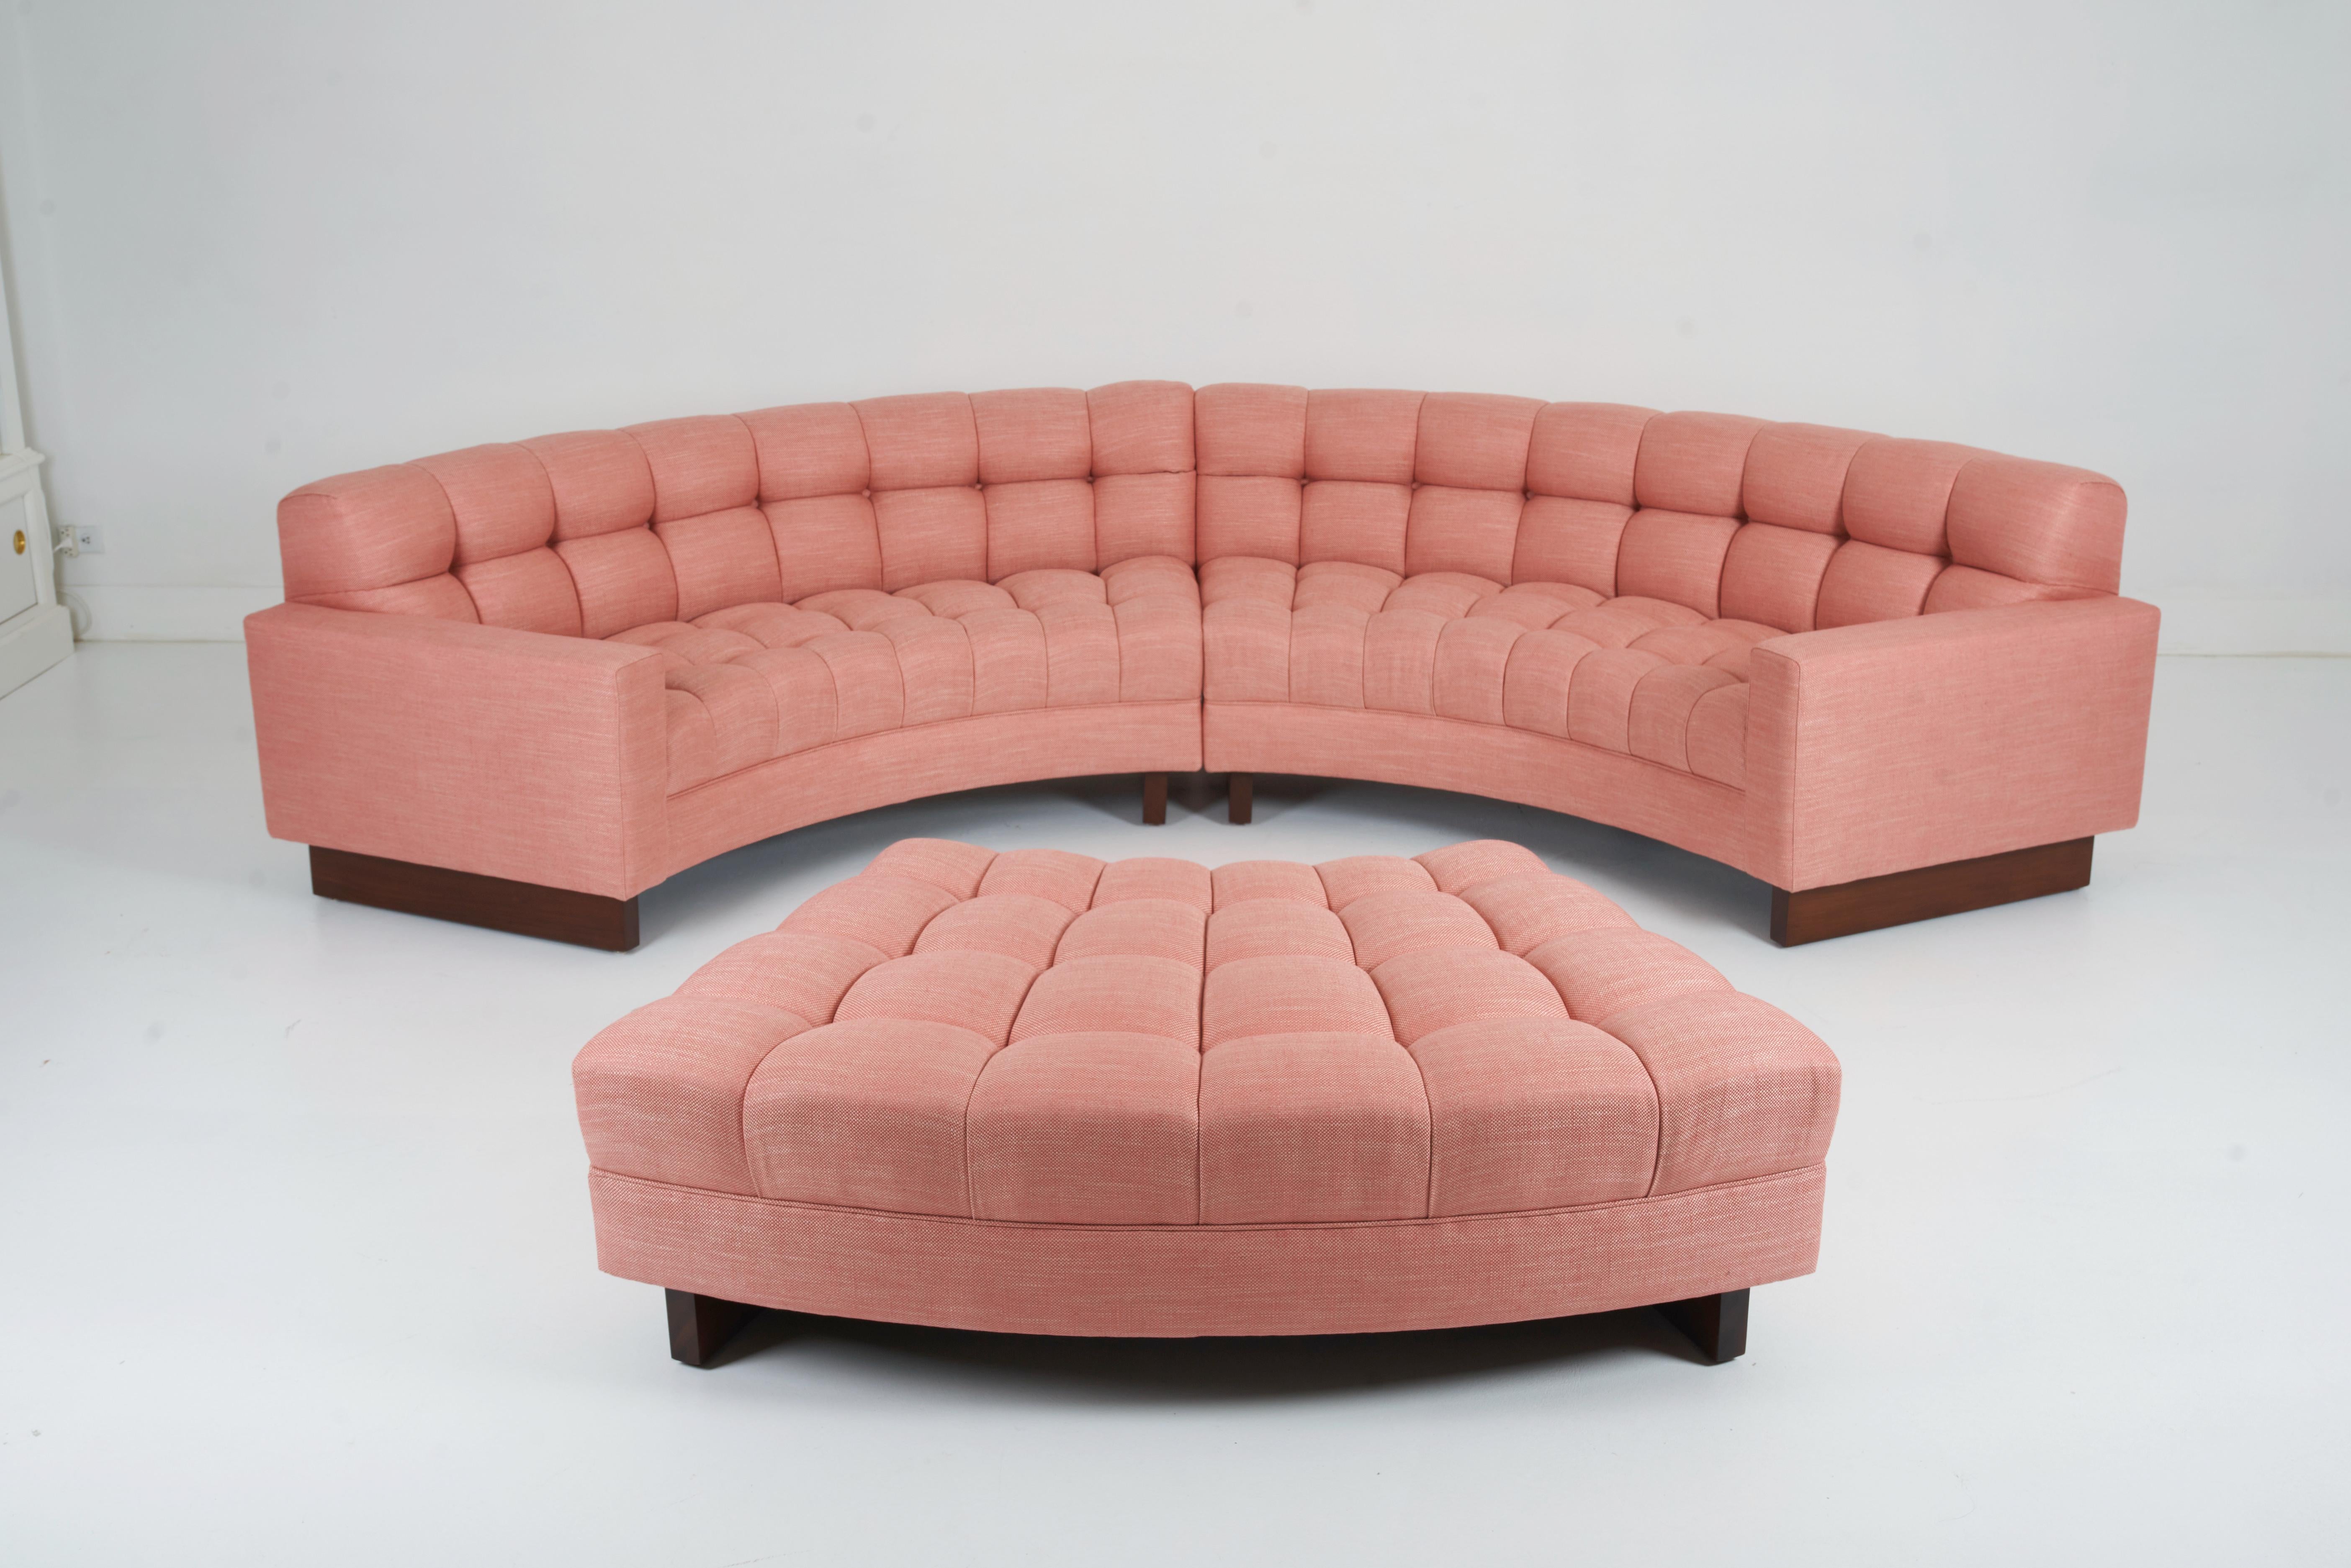 Biscuit Tufted, Guava Colored, Curved Three Piece Sectional by William Haines 4